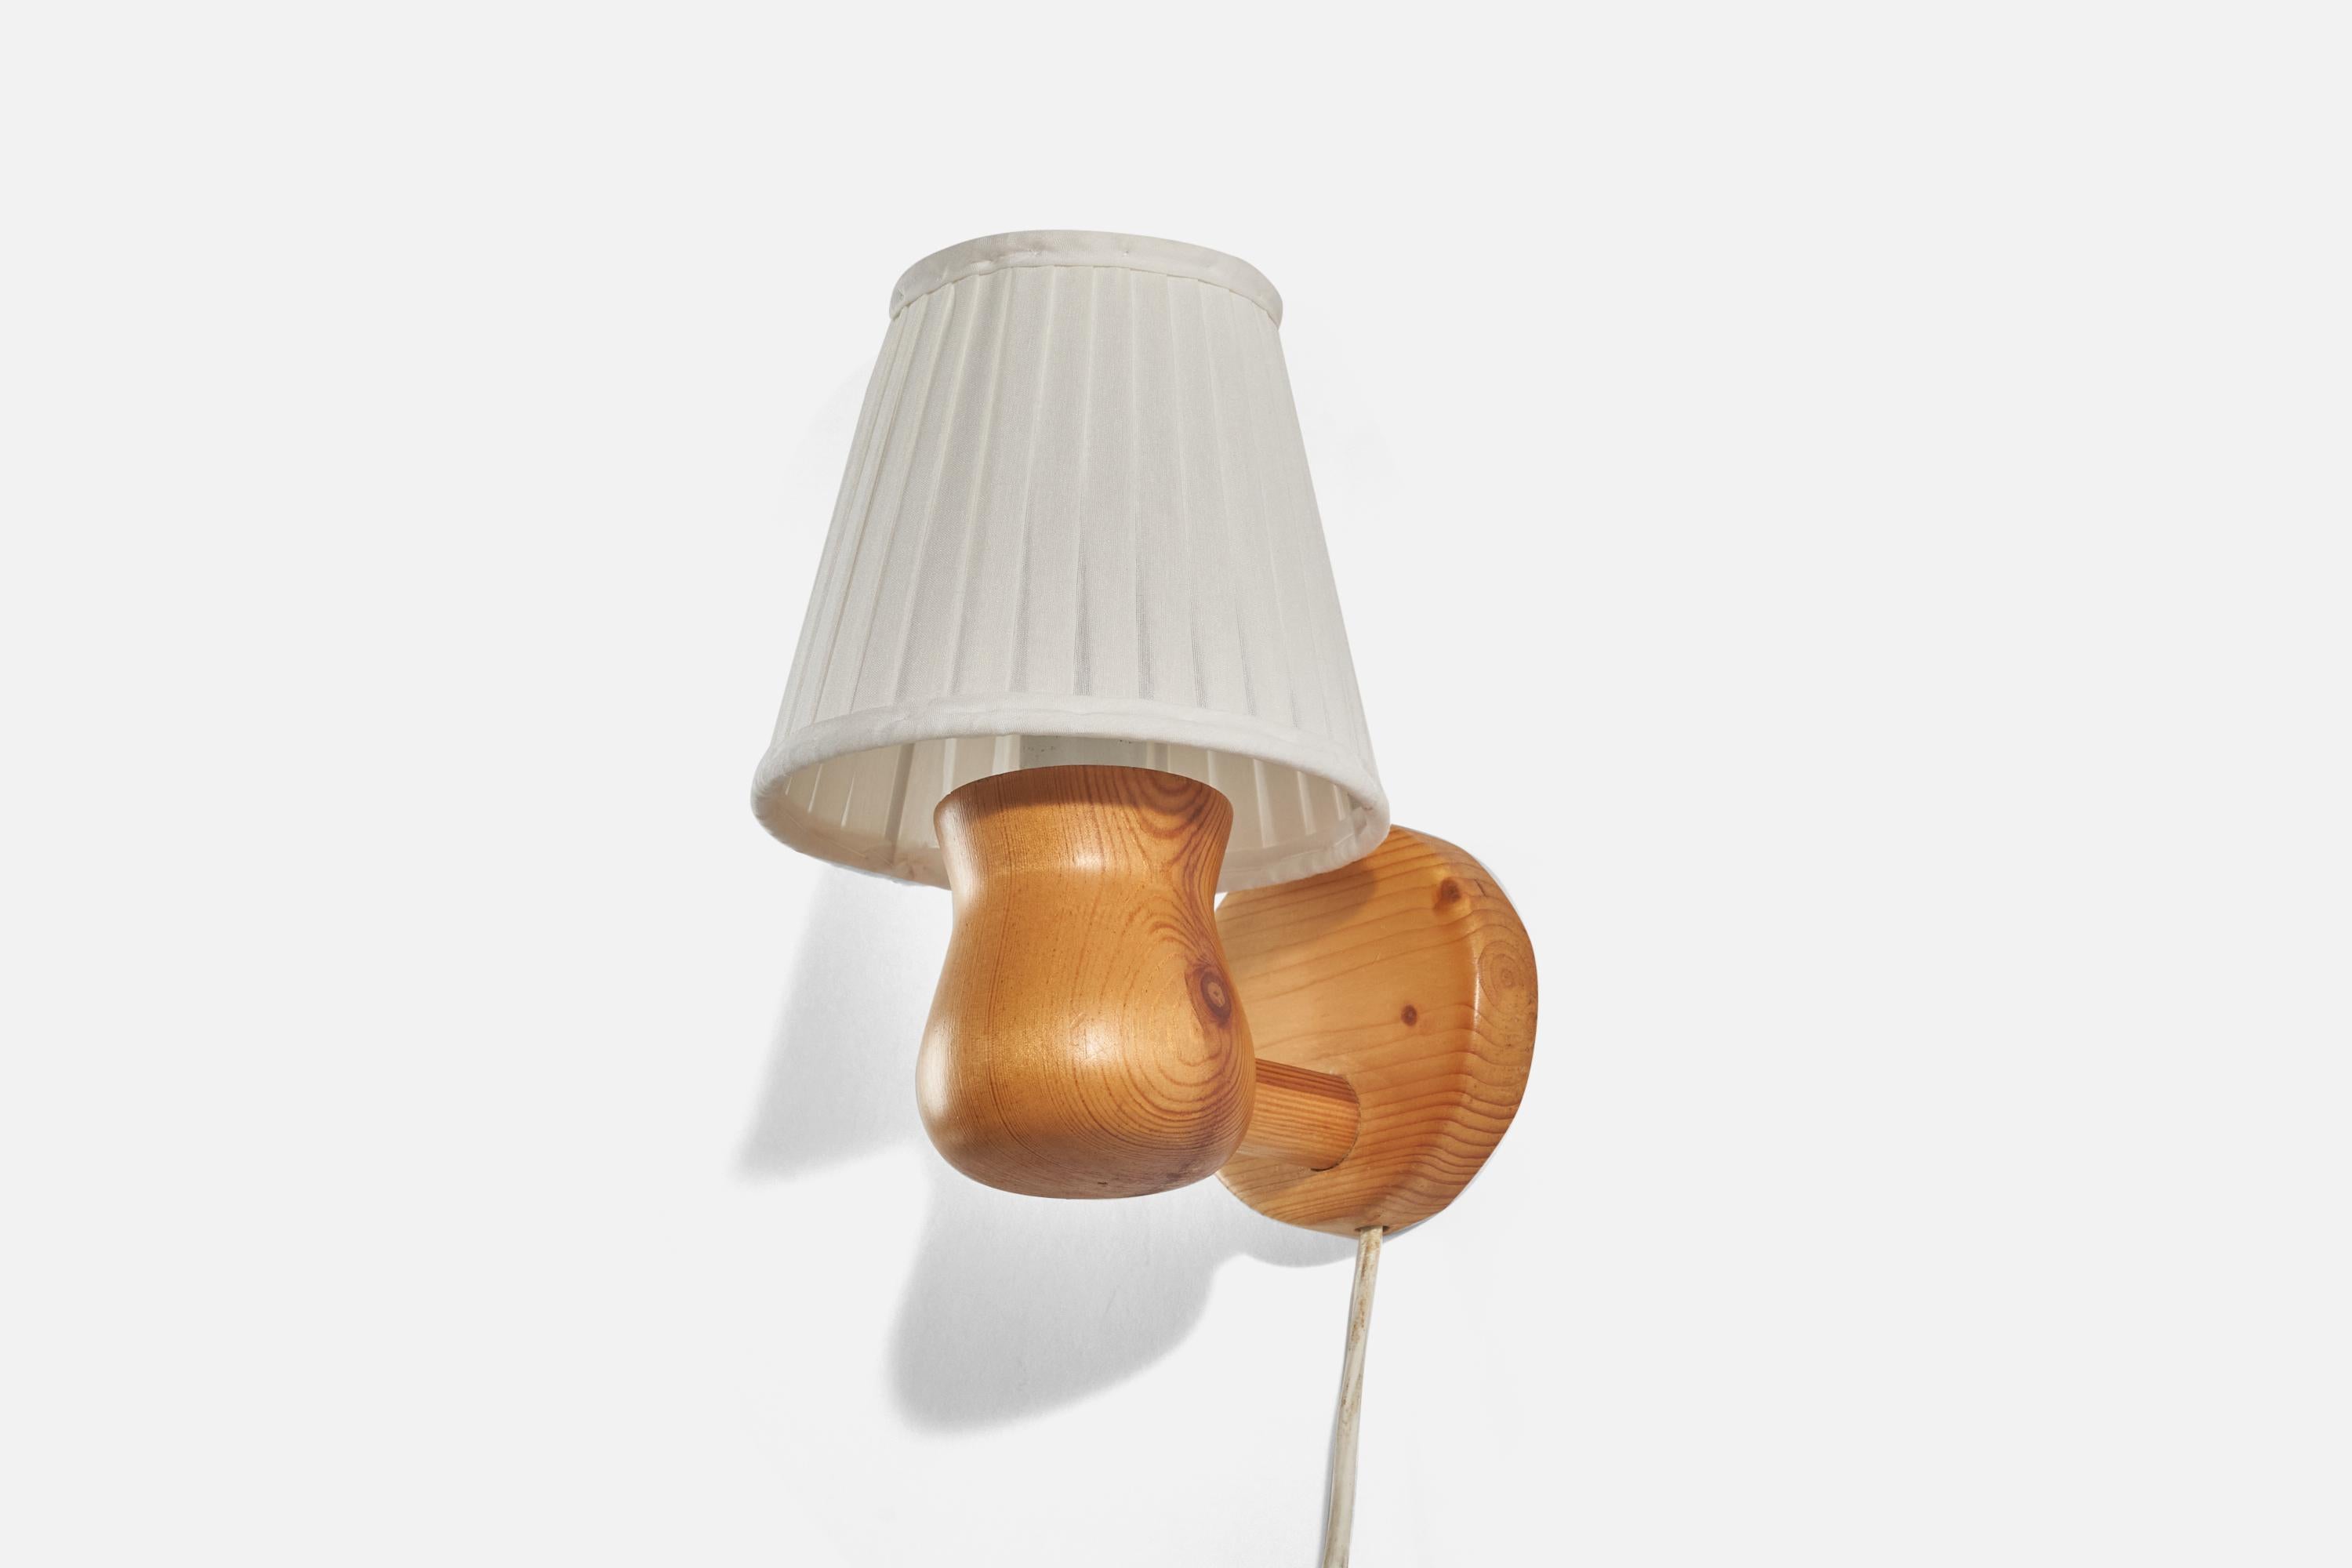 A pine and white fabric wall light designed and produced in Sweden, 1970s.

Sold with Lampshade. Dimensions stated are of Sconce with Shade(s).

Dimensions of Back Plate (inches) : 3.62 x 3.62 x 0.87 (Height x Width x Depth).

Socket takes